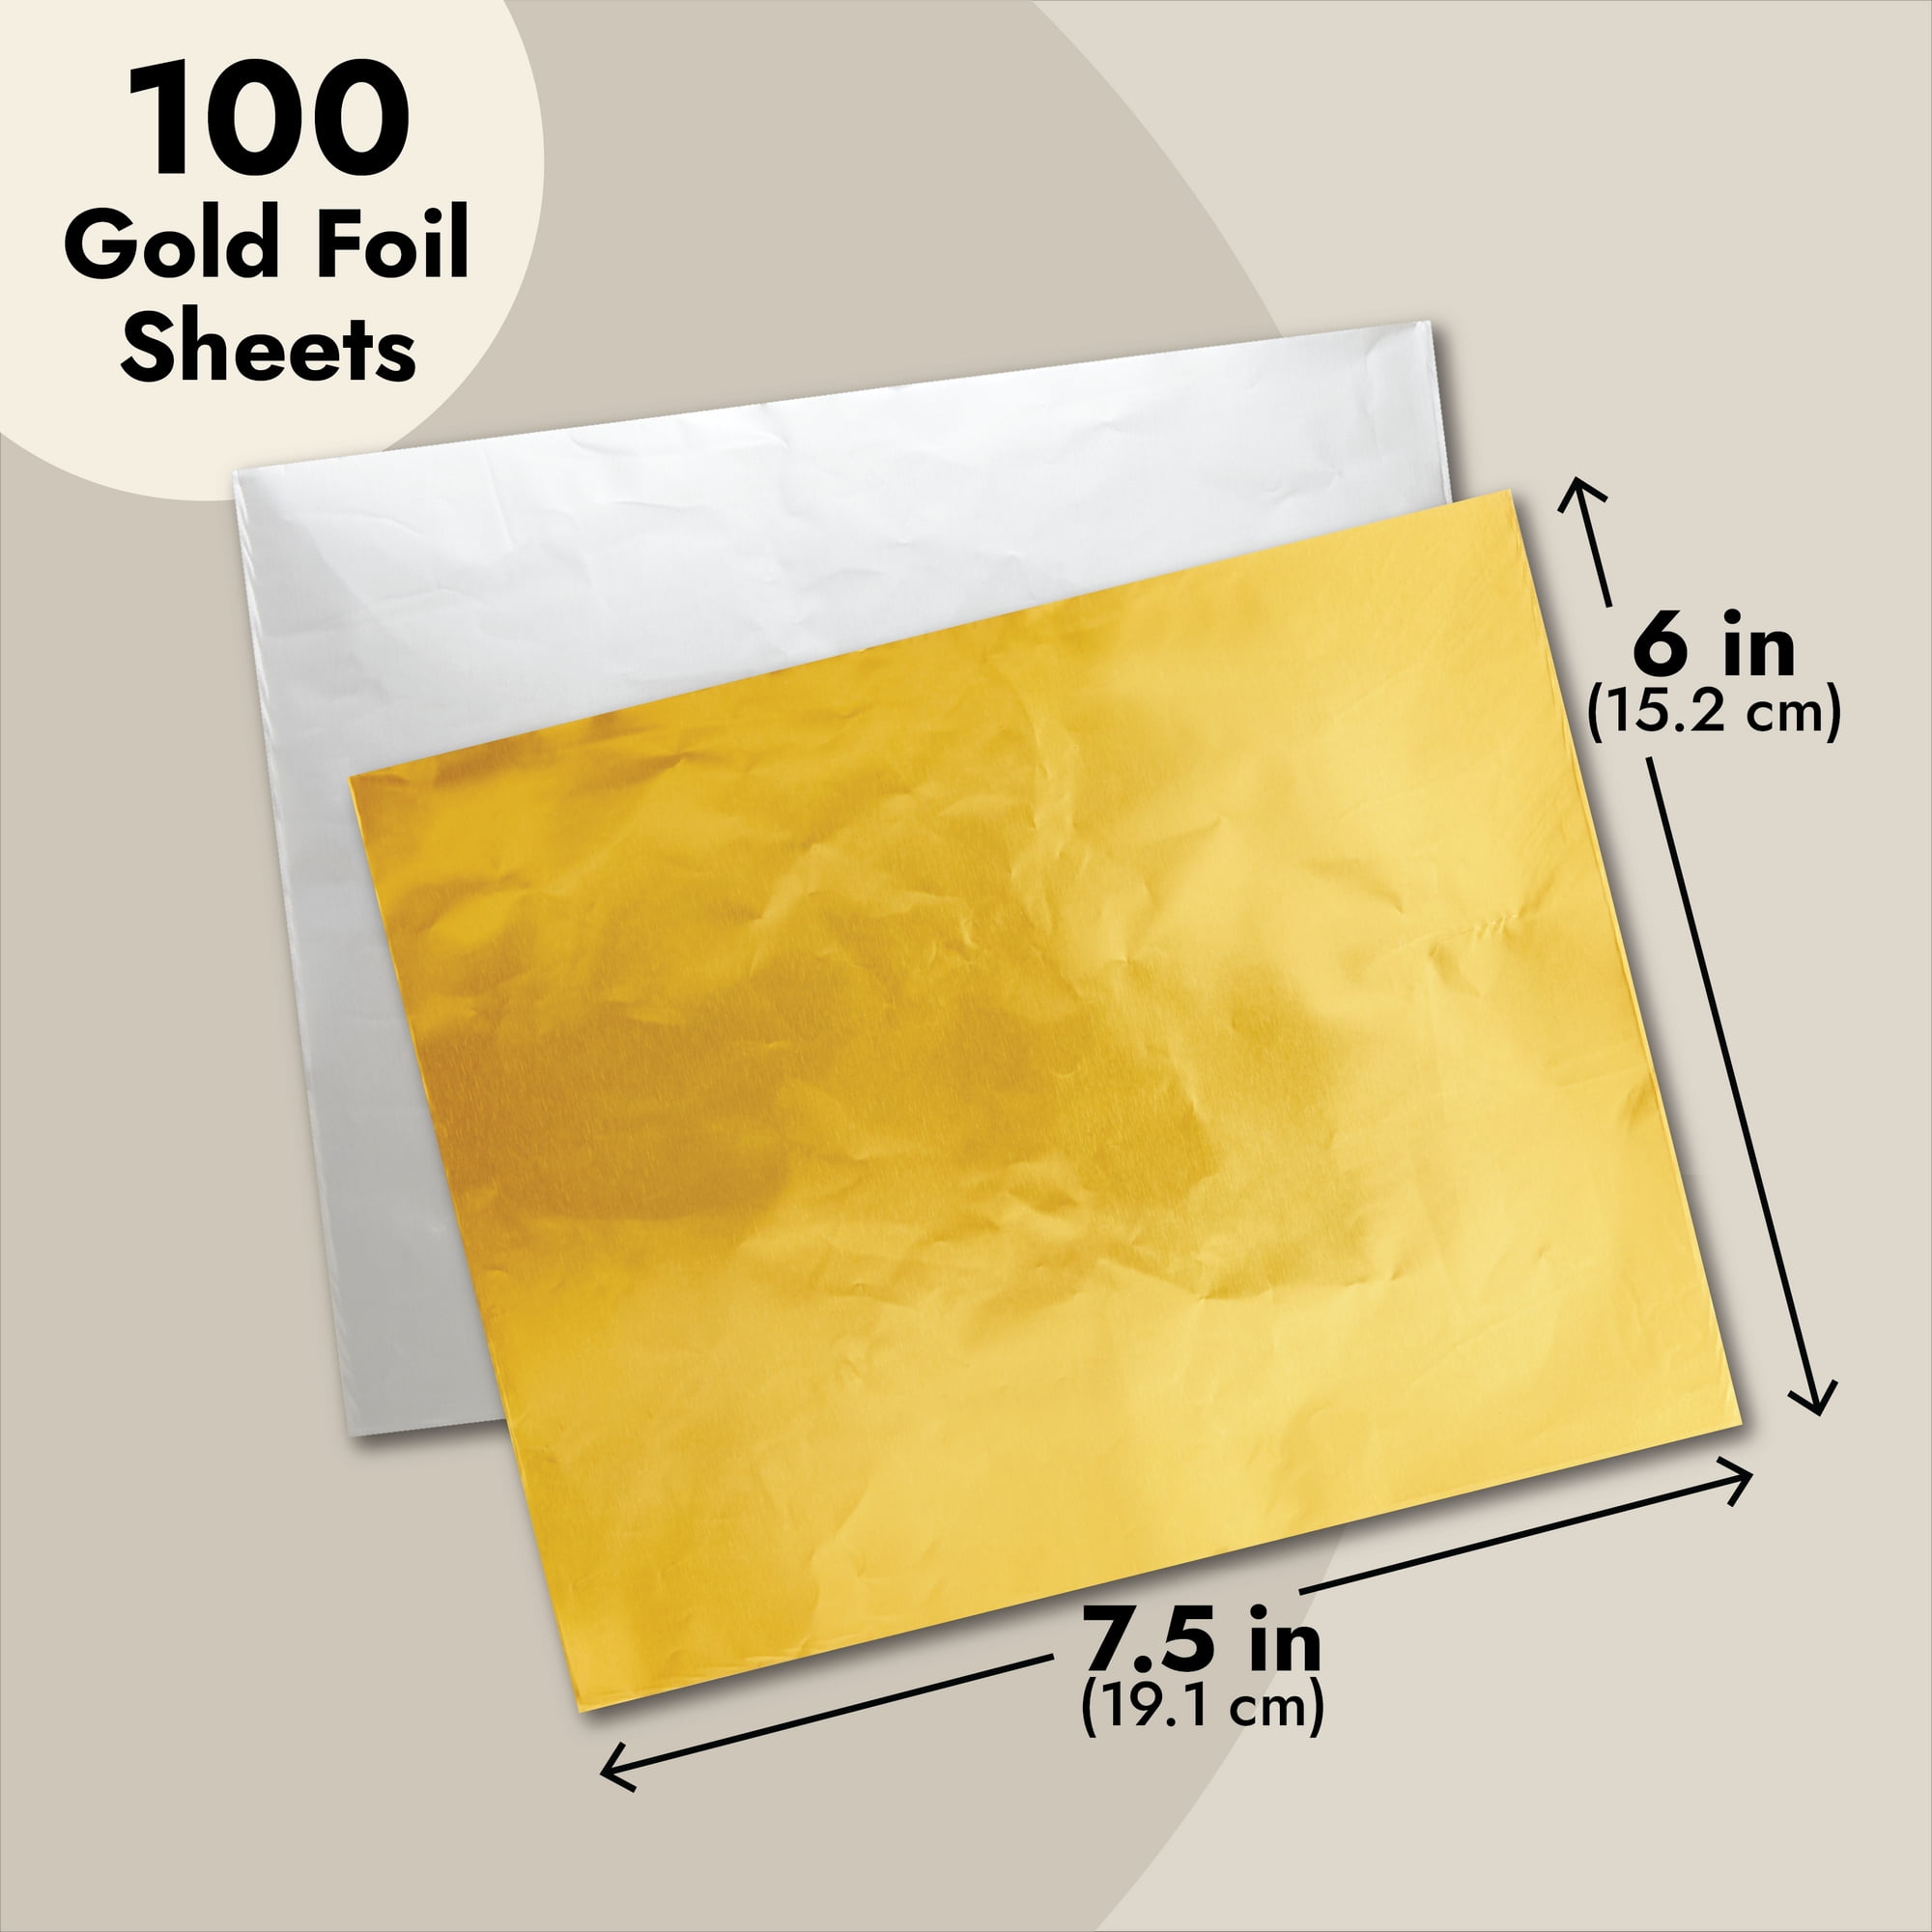 Crown Display Metallic Gold Foil Sheets For Gift Wrapping 100 Sheets I 15  In X 20 In I Gold Foil Sheets For Crafts I Plastic Wrap For Presents I Gift